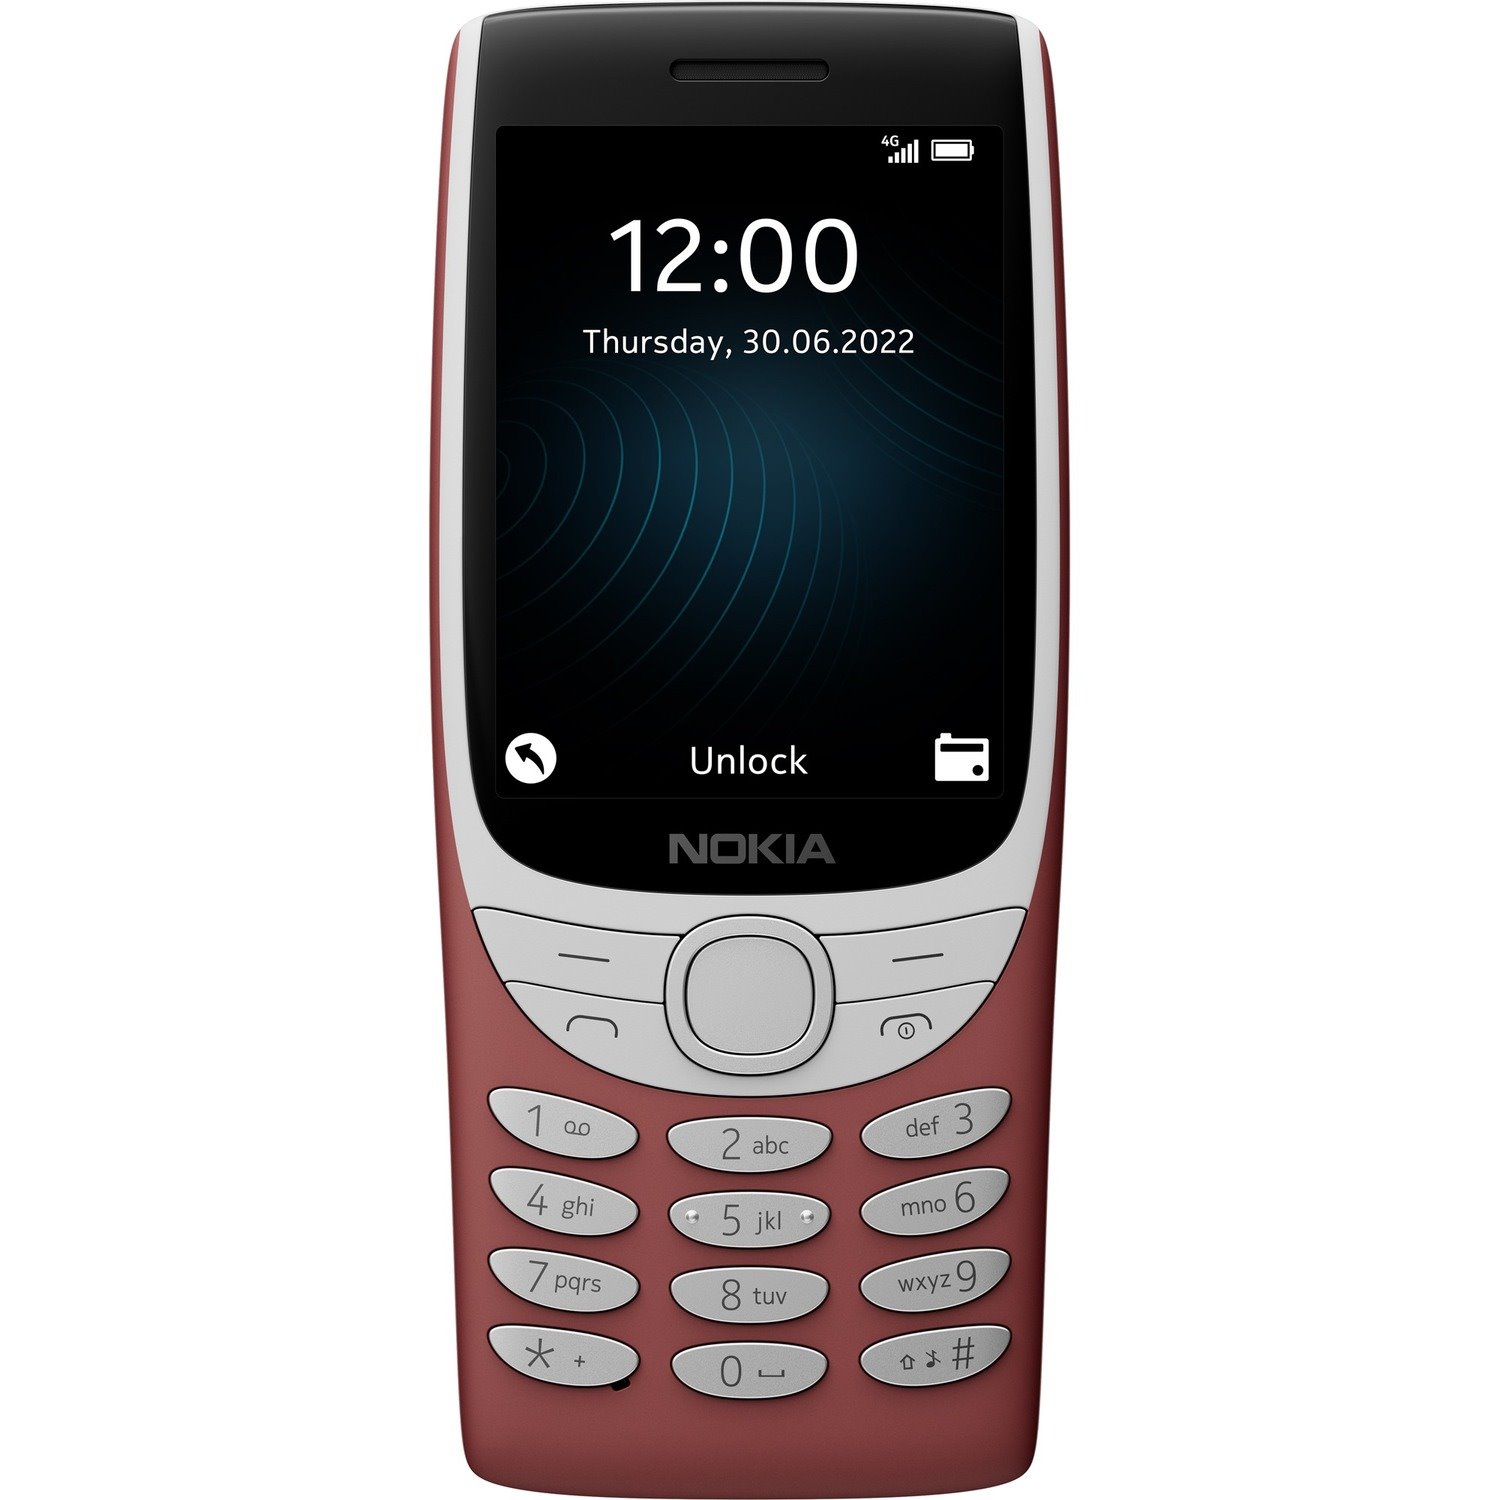 Nokia 8210 128 MB Feature Phone - 7.1 cm (2.8") TFT LCD QVGA 240 x 320 - Cortex A71 GHz - 48 MB RAM - Series 30+ - 4G - Red